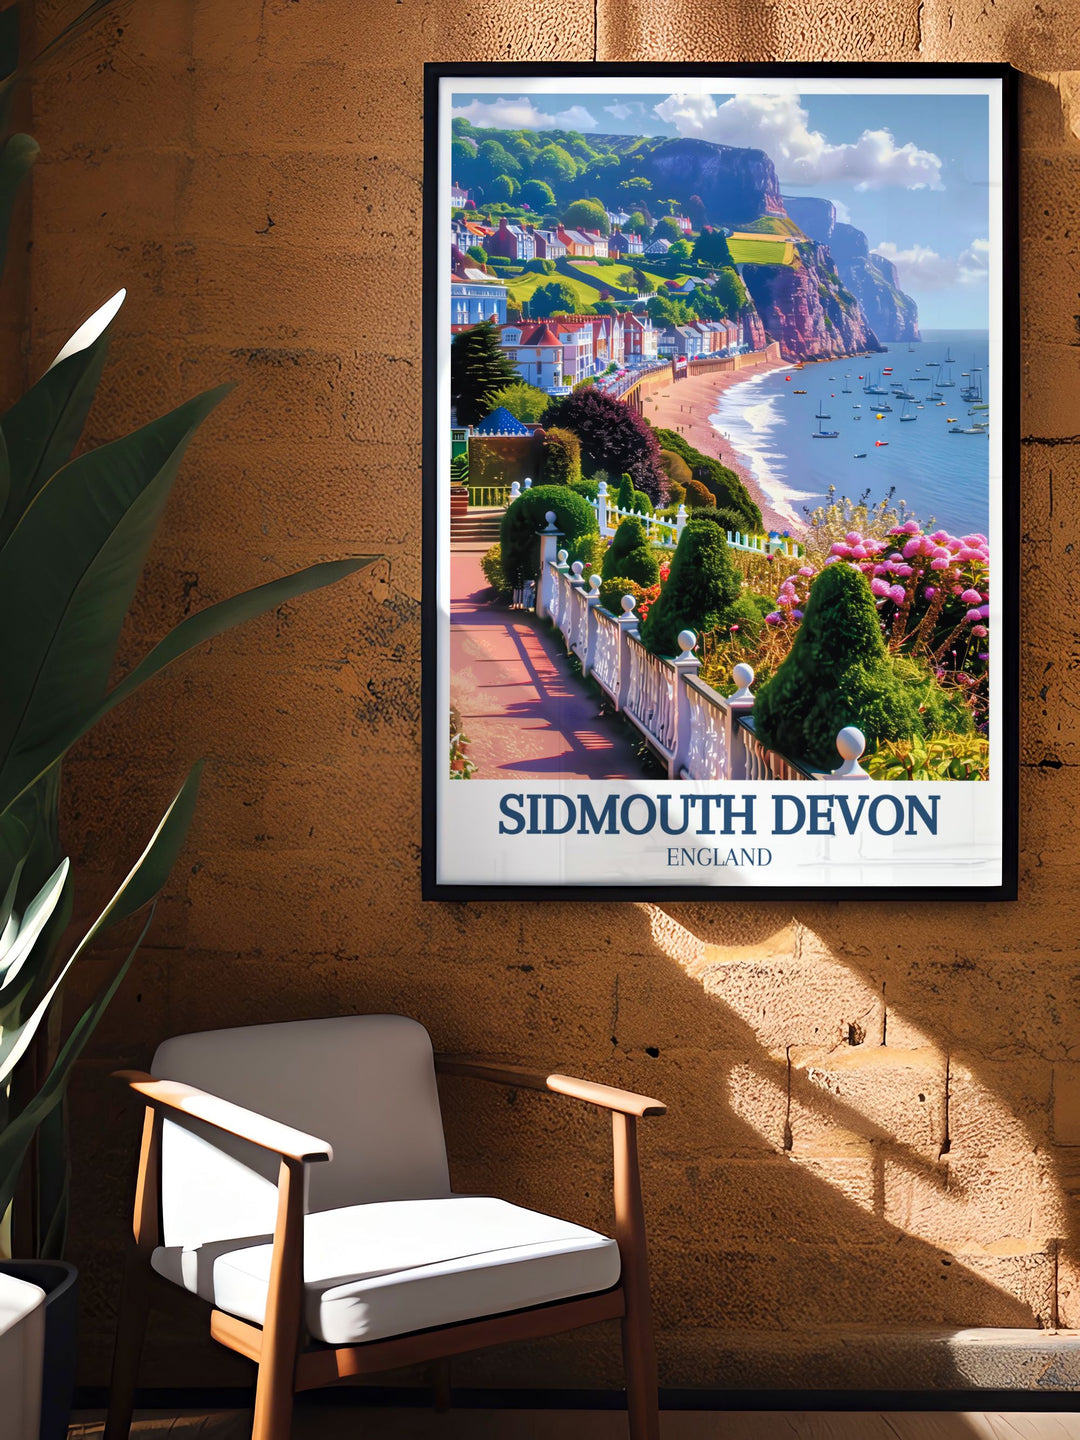 Bring the charm of Sidmouth into your home with this detailed poster featuring the Jurassic Coast and the Esplanade, highlighting the unique blend of natural and historical beauty in Devon.